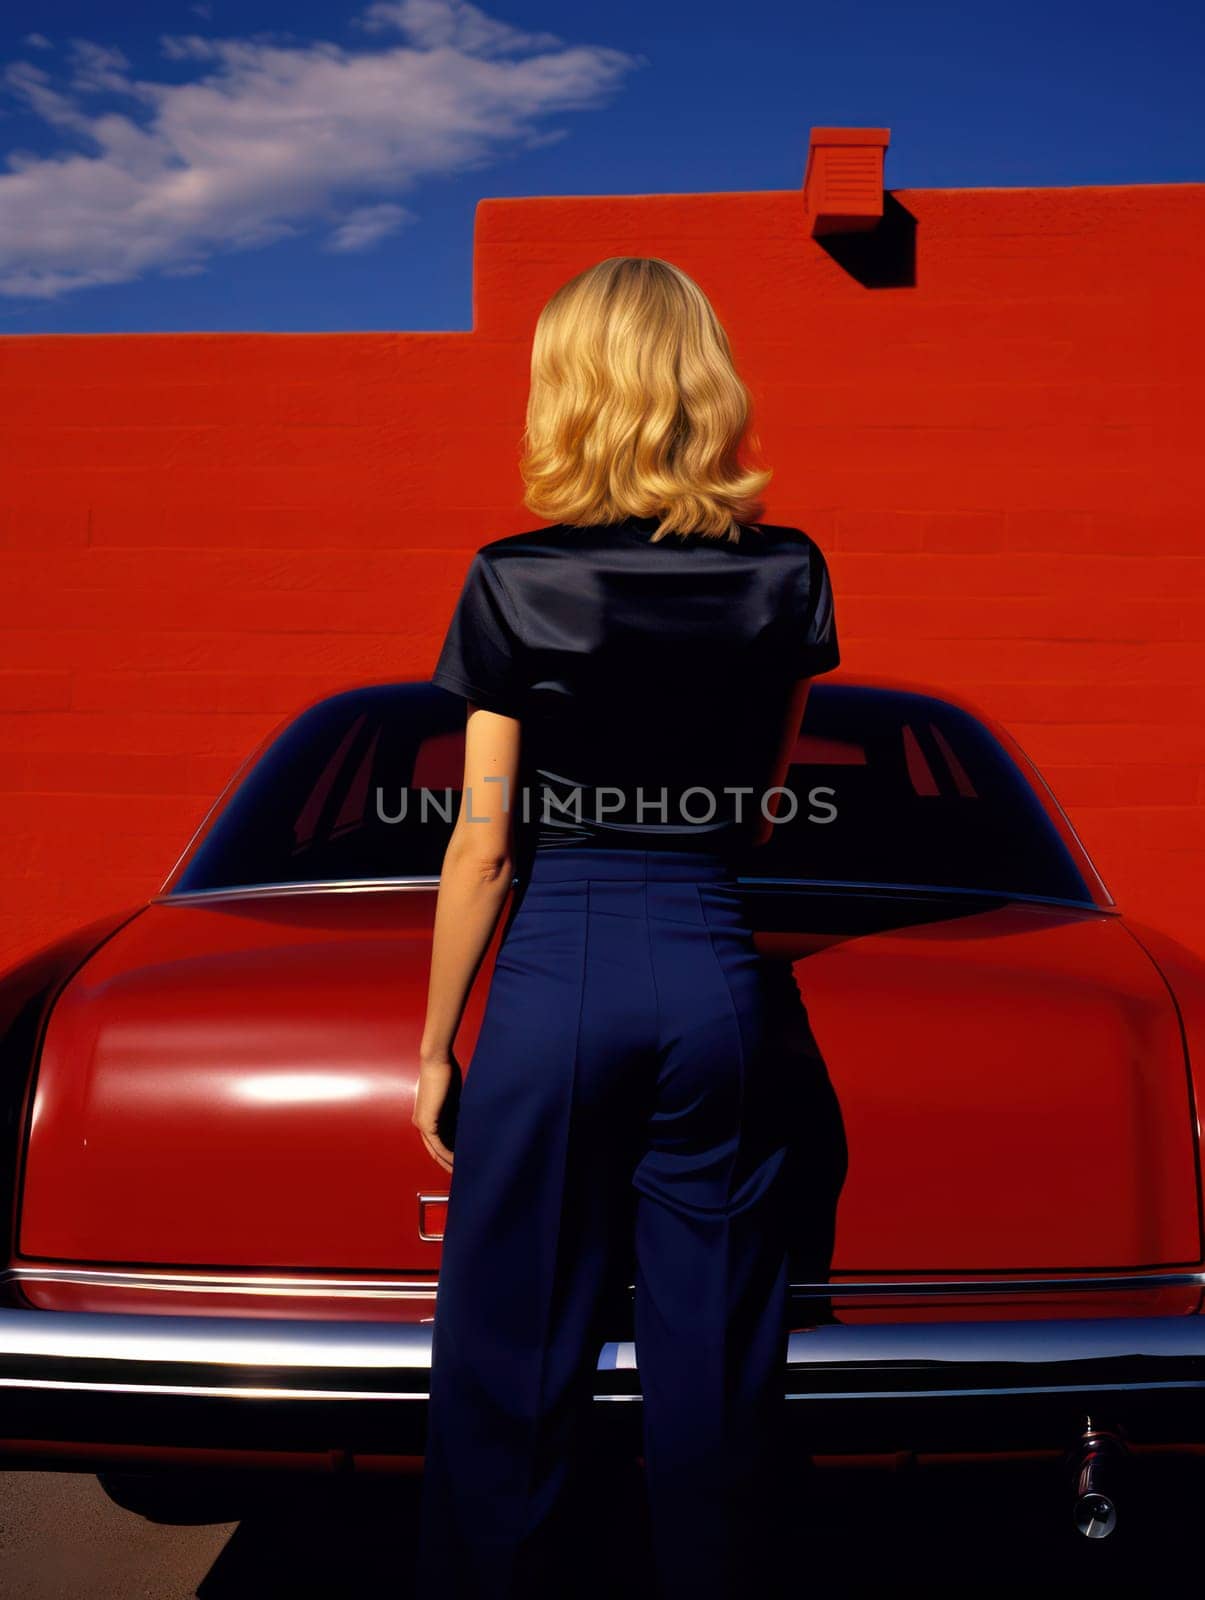 Red Retro Car, Radiant Beauty, and Carefree Summer Vibes: A Captivating Portrait of a Modern Vintage Lady in a Stylish Dress Standing Near a Classic Automobile on a Hot Street Under a Blue Sky